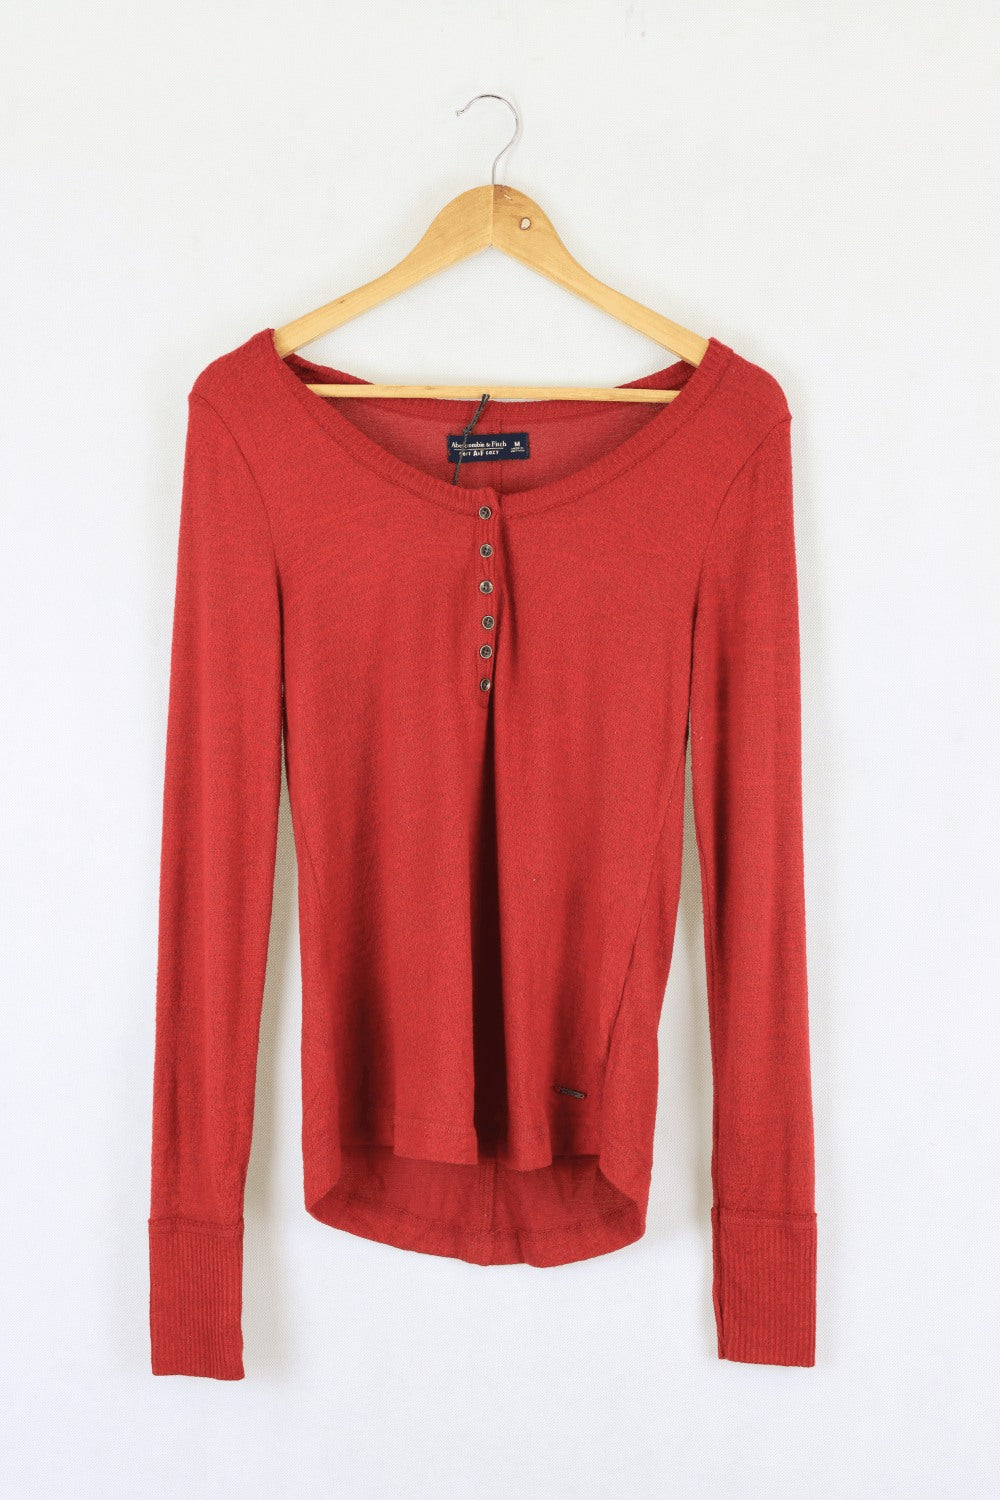 Abercrombie & Fitch Red Top M